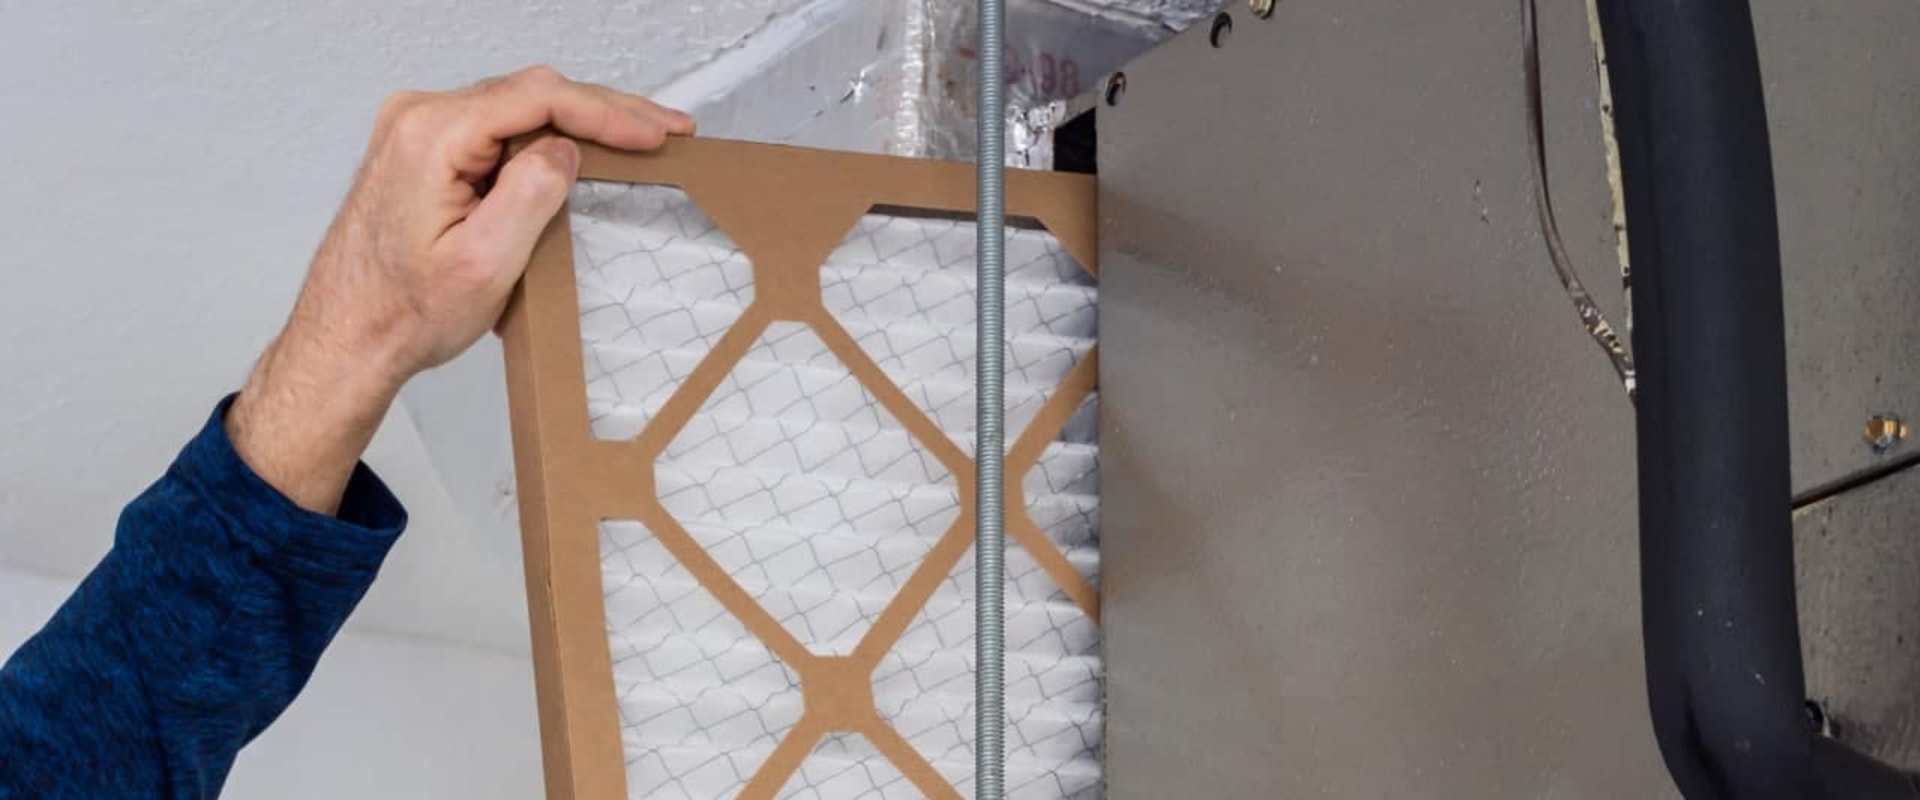 What Are the Consequences of Putting the Wrong Size Filter in Your Furnace?